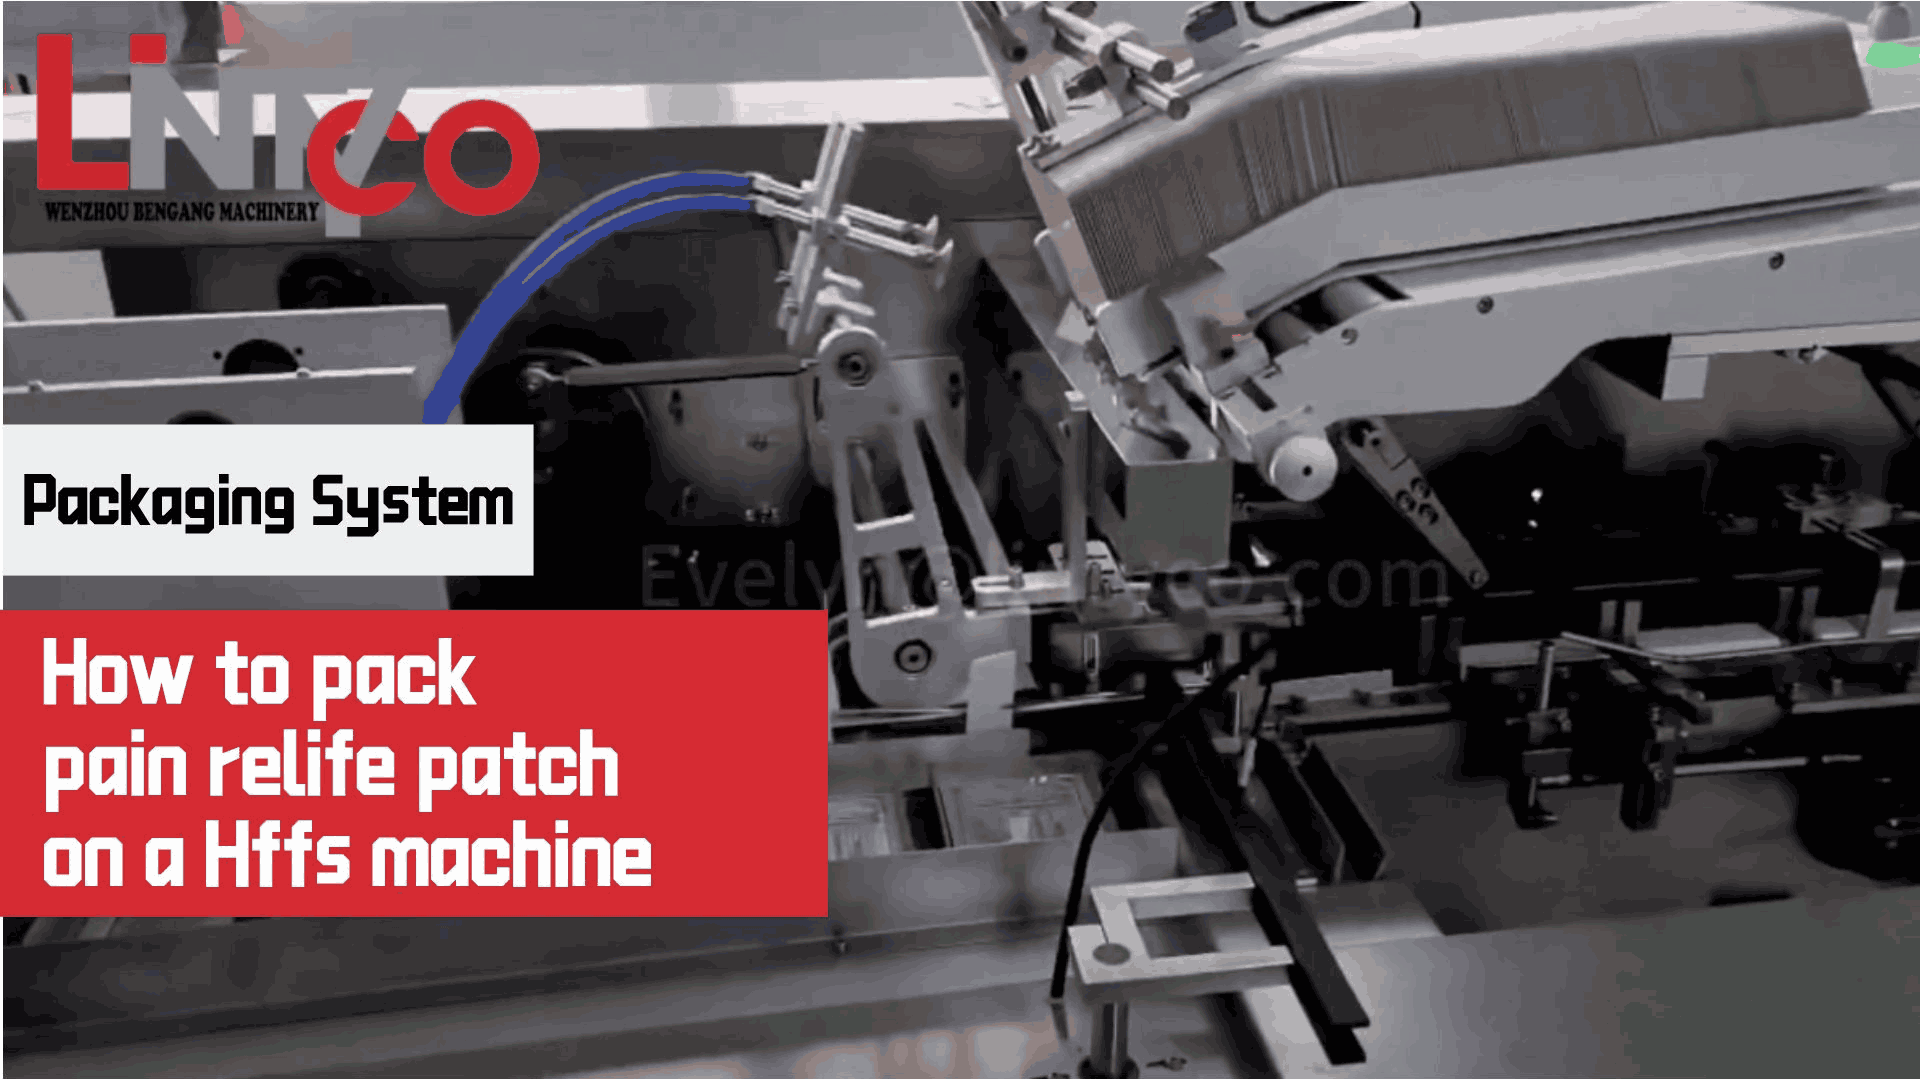 How to pack pain relief patch on a hffs machine